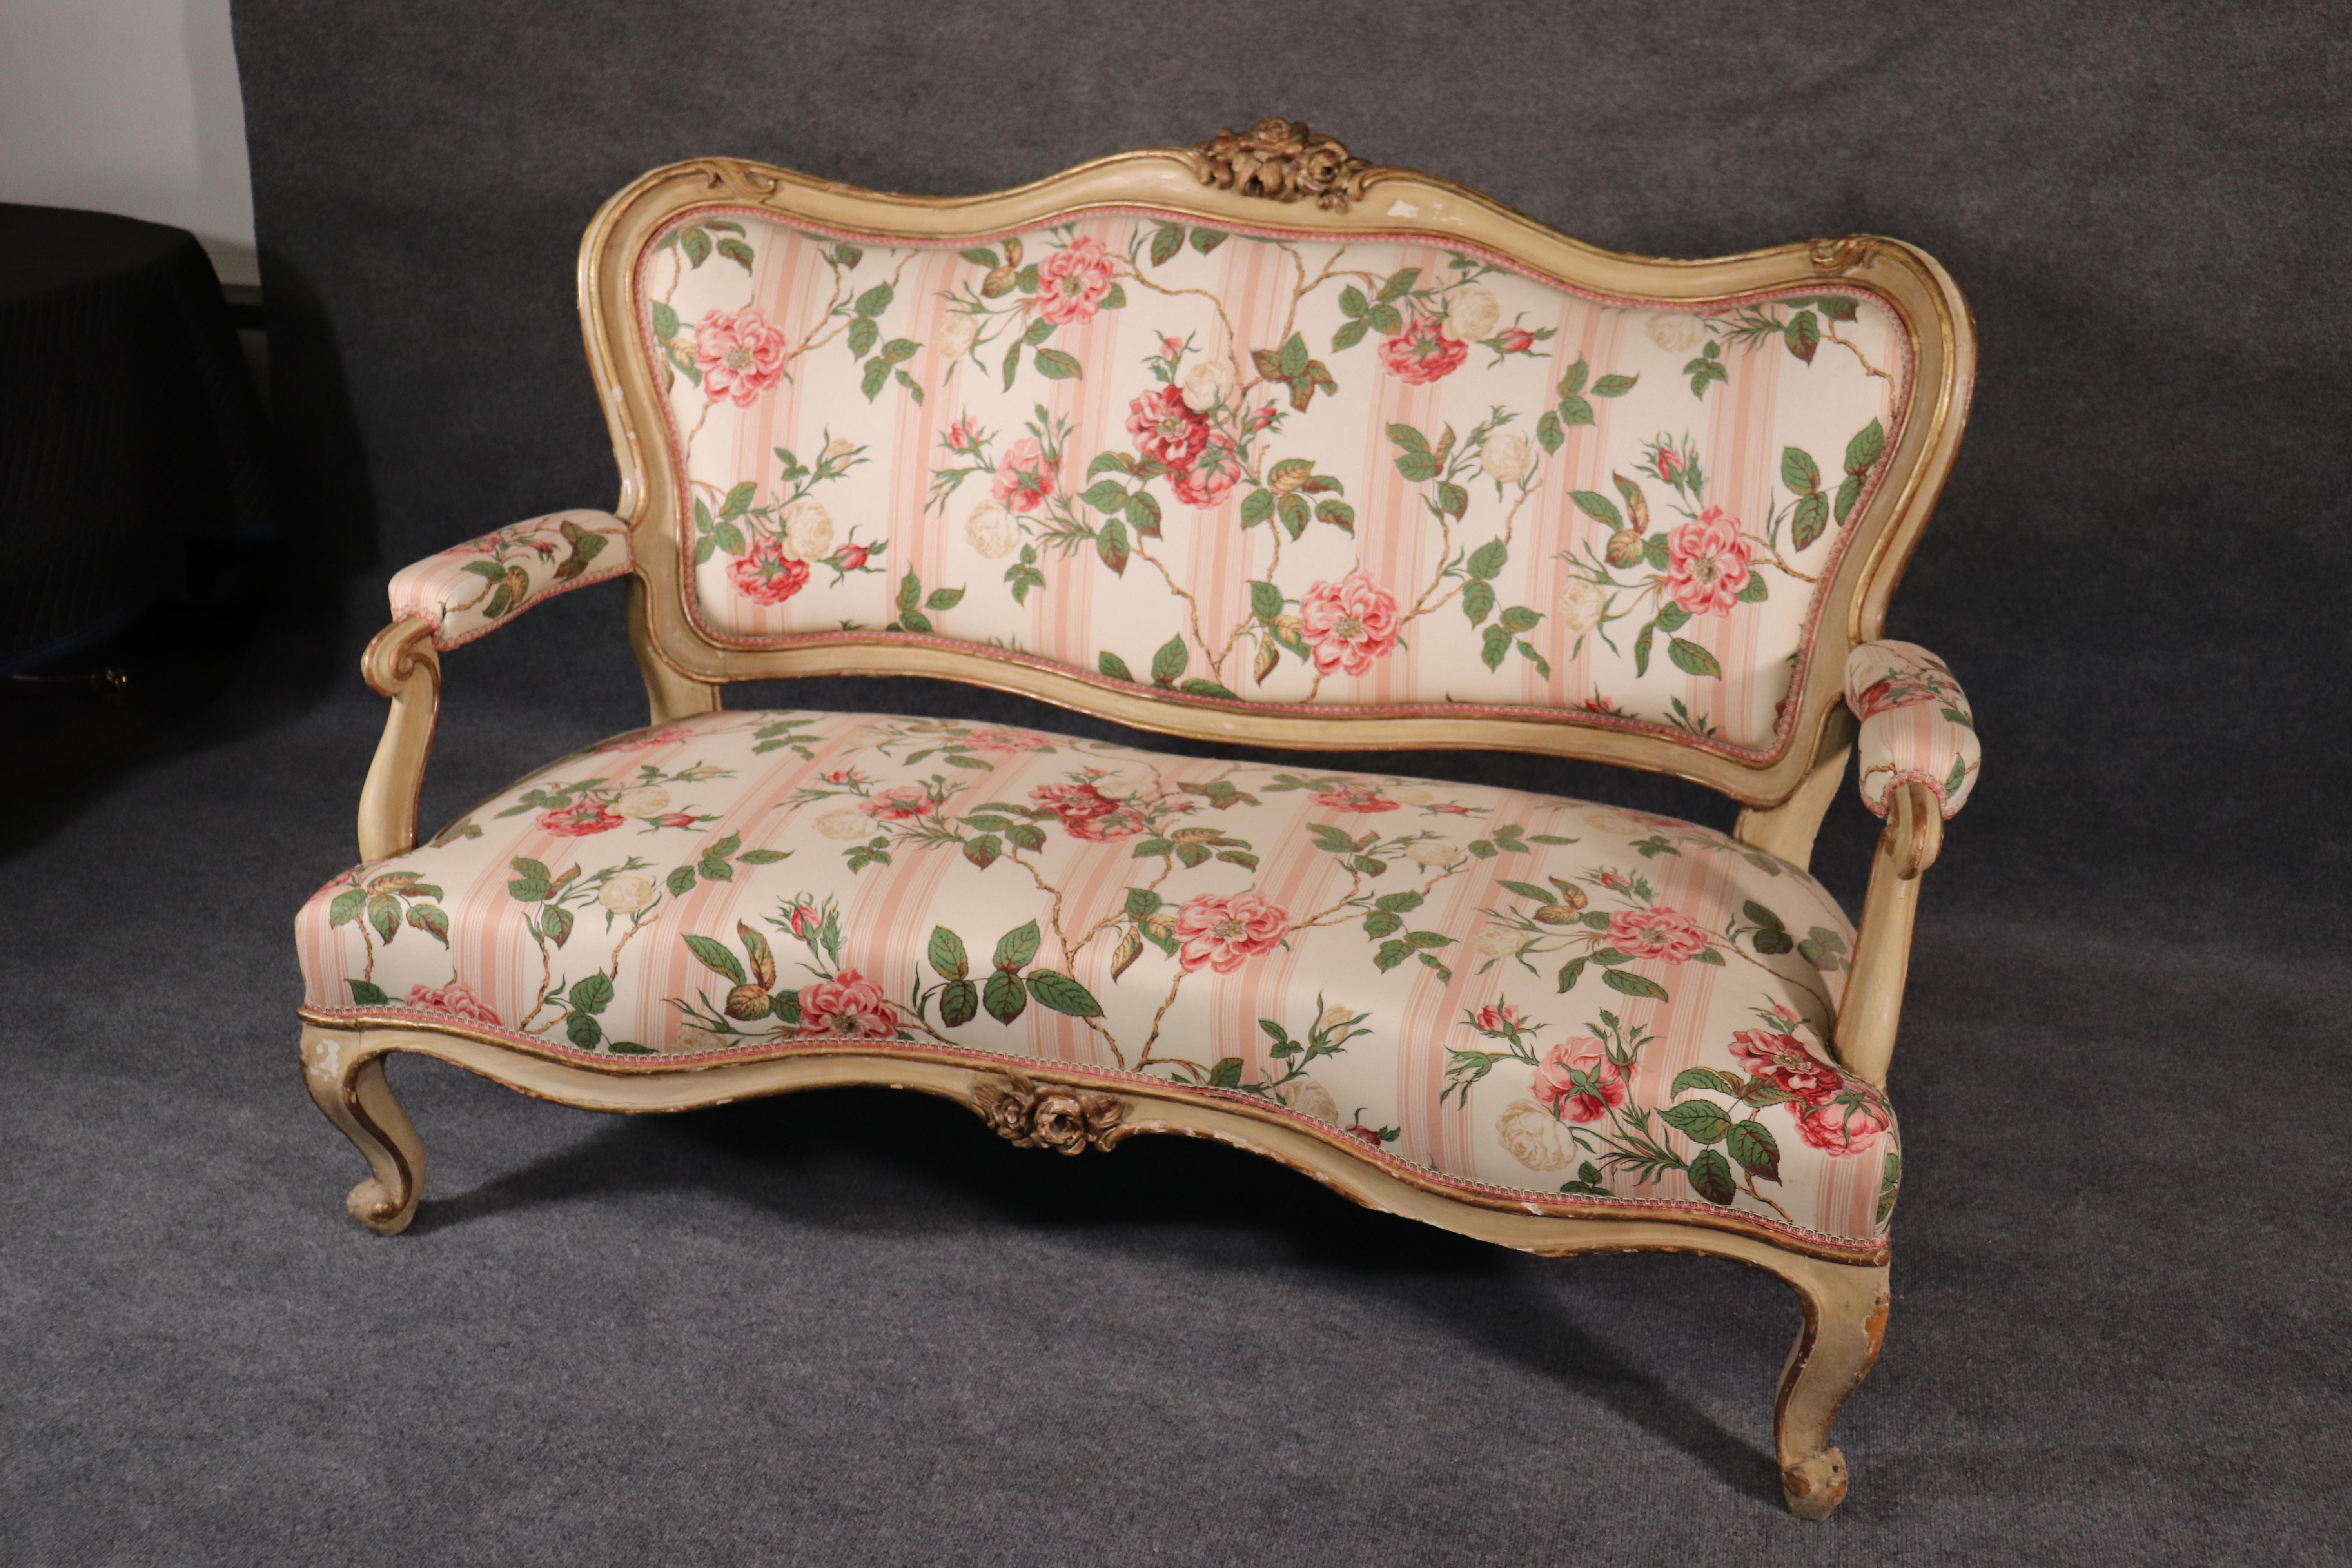 This is a beautiful French-made rococo paint decorated settee with floral upholstery in good condition. The settee dates to the 1890s and is very chic and can match many different design schemes. The settee measures 59.25 wide x 29 deep x 40.5 tall.